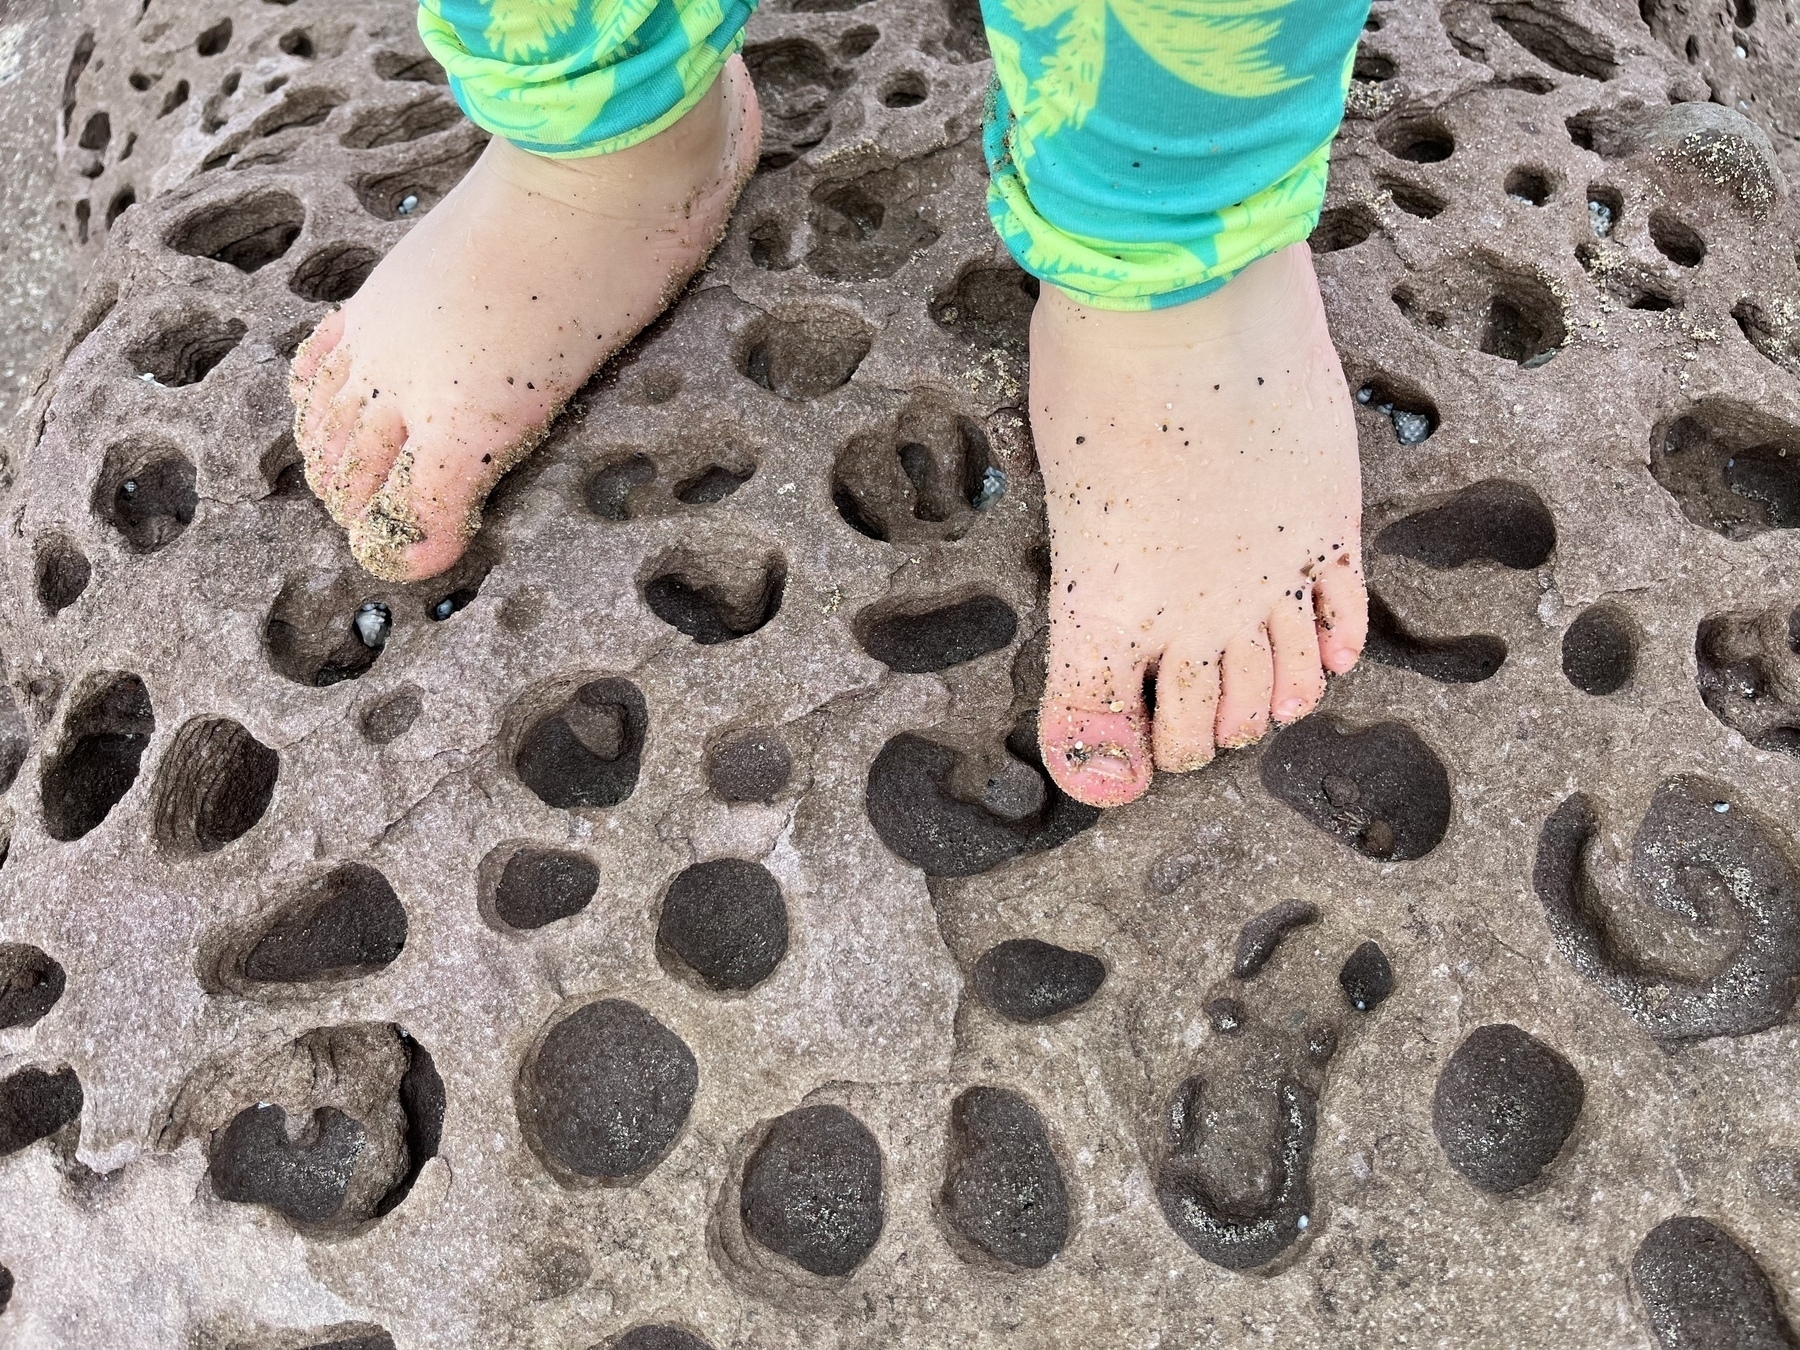 A toddler’s feet on a rock that’s full of eroded holes